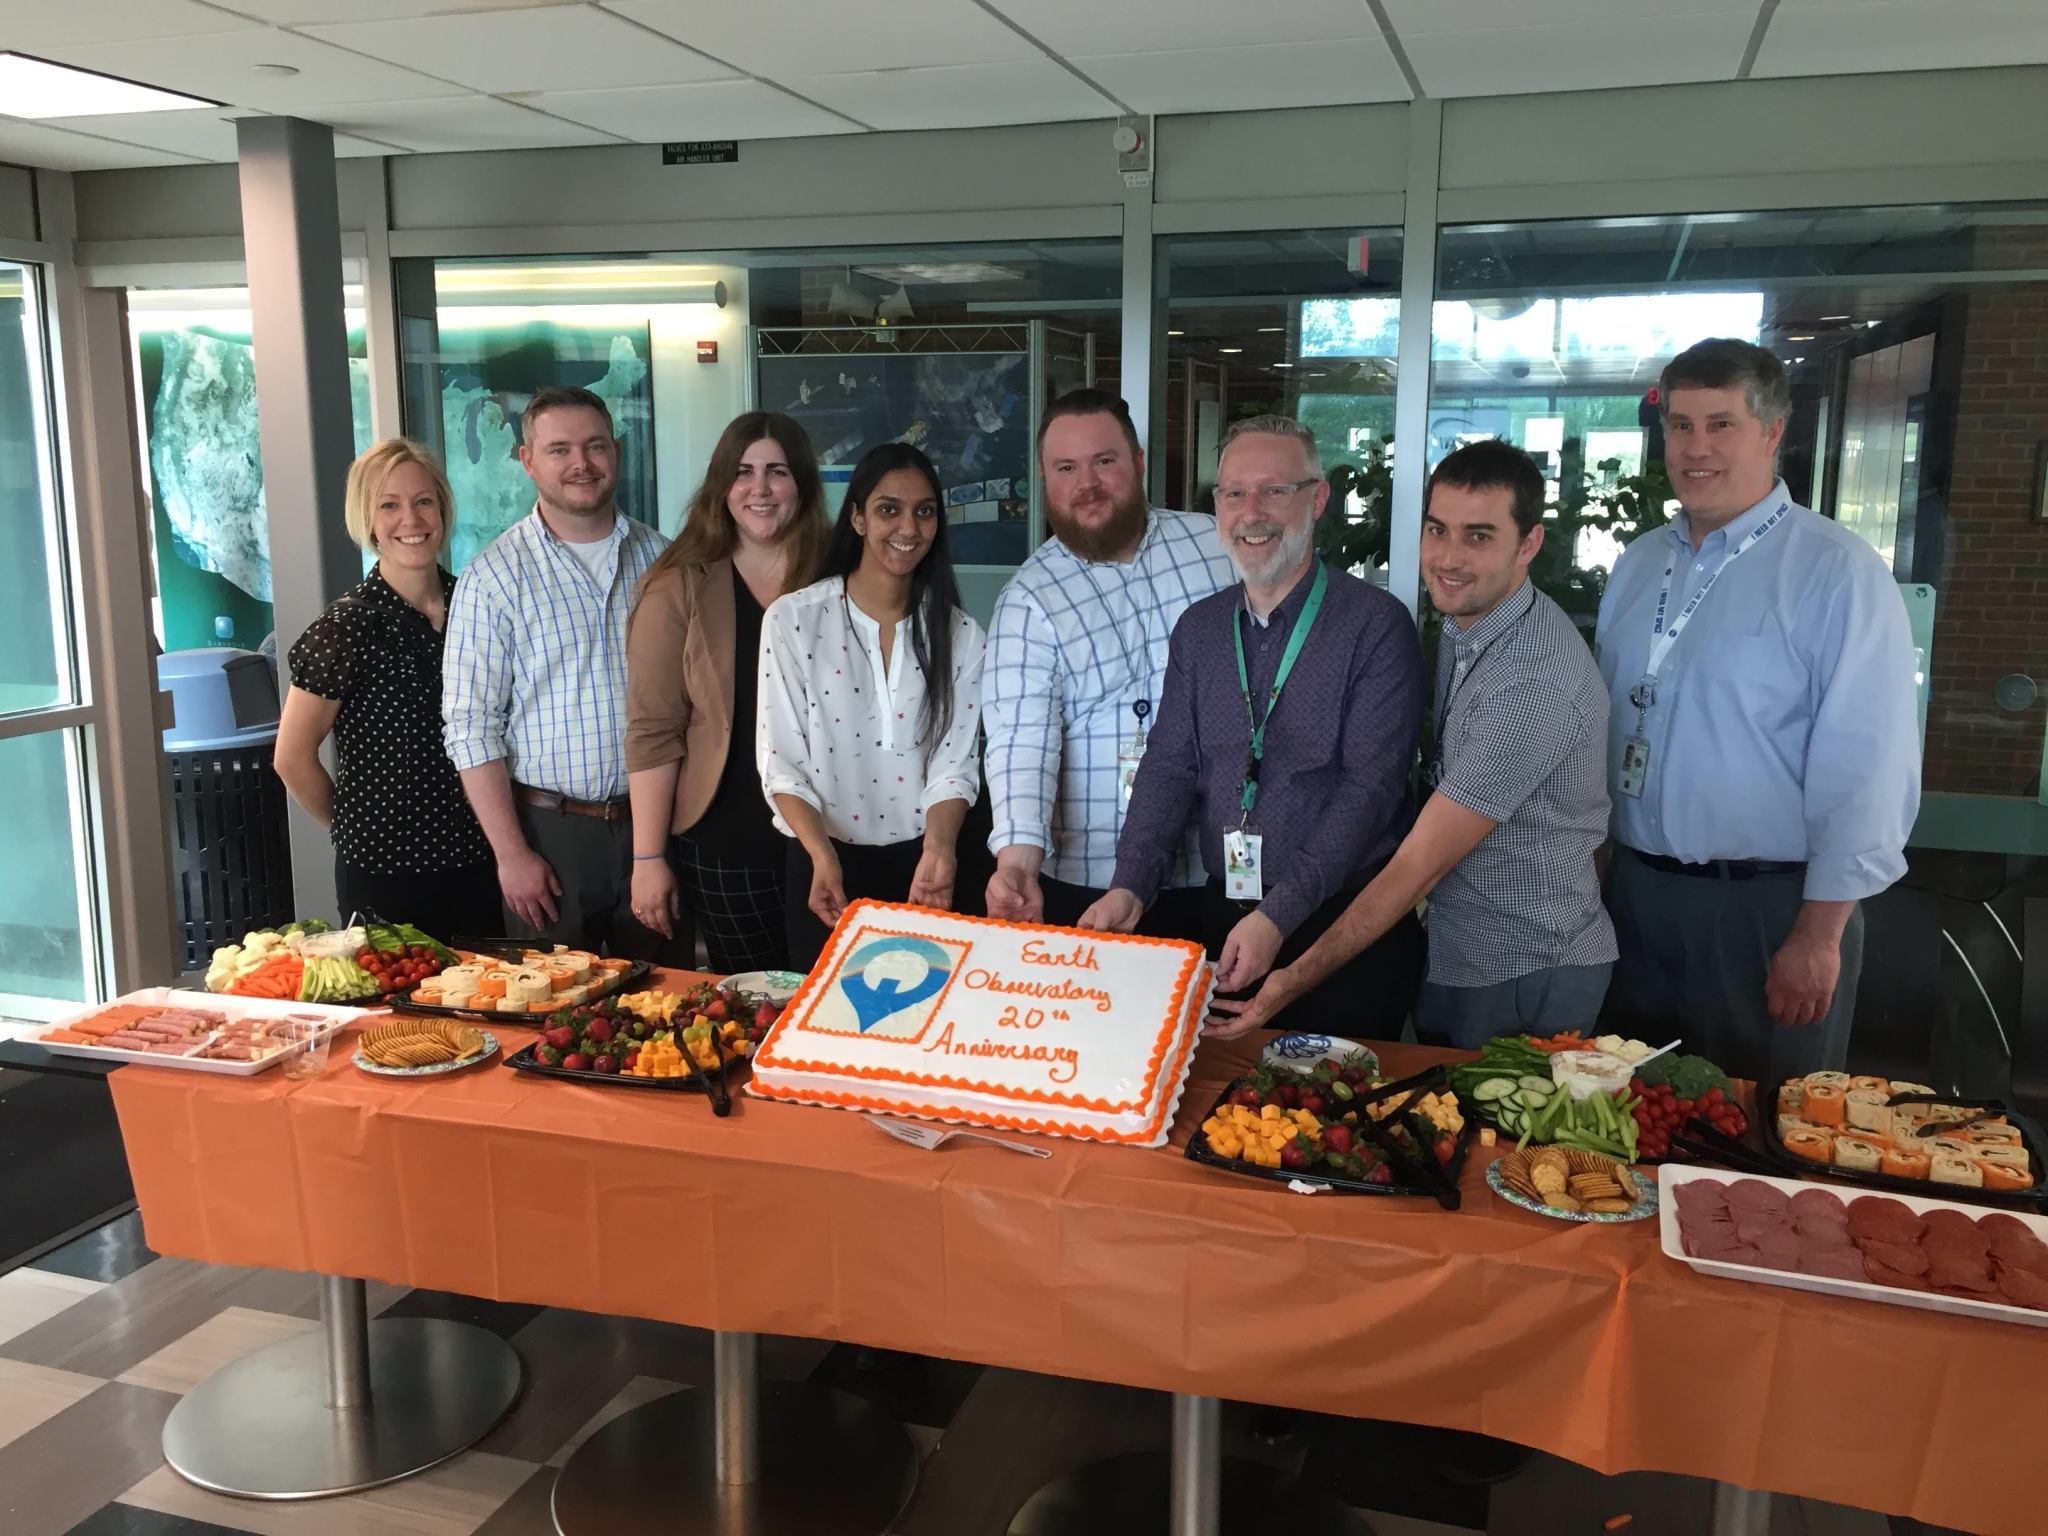 members of the EO team stand behind a table and pose with a cake